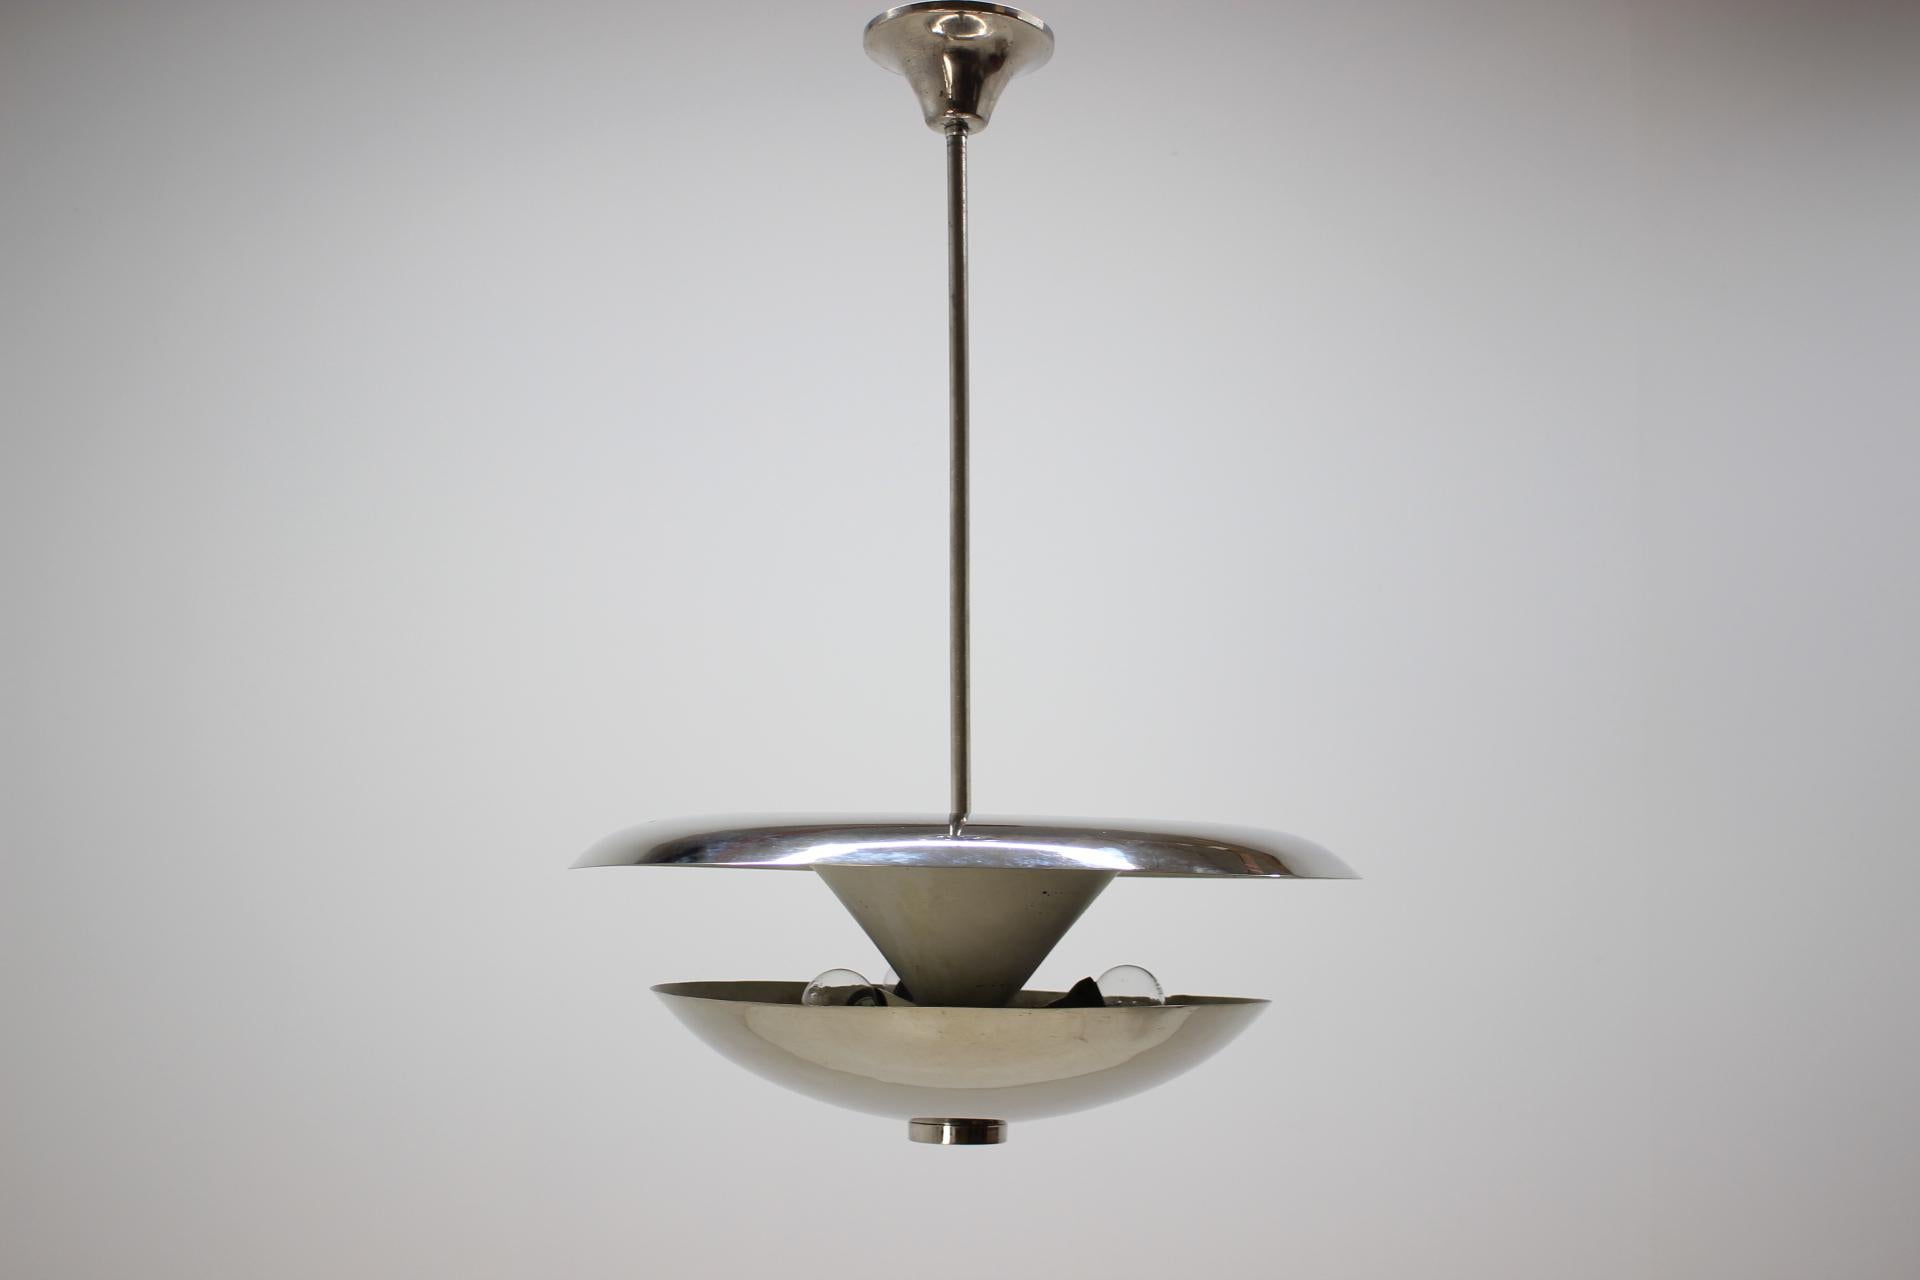 - 1940s
- Maker: Napako
- Indirect lighting
- Chrome in perfect condition
- Good original condition with patina.